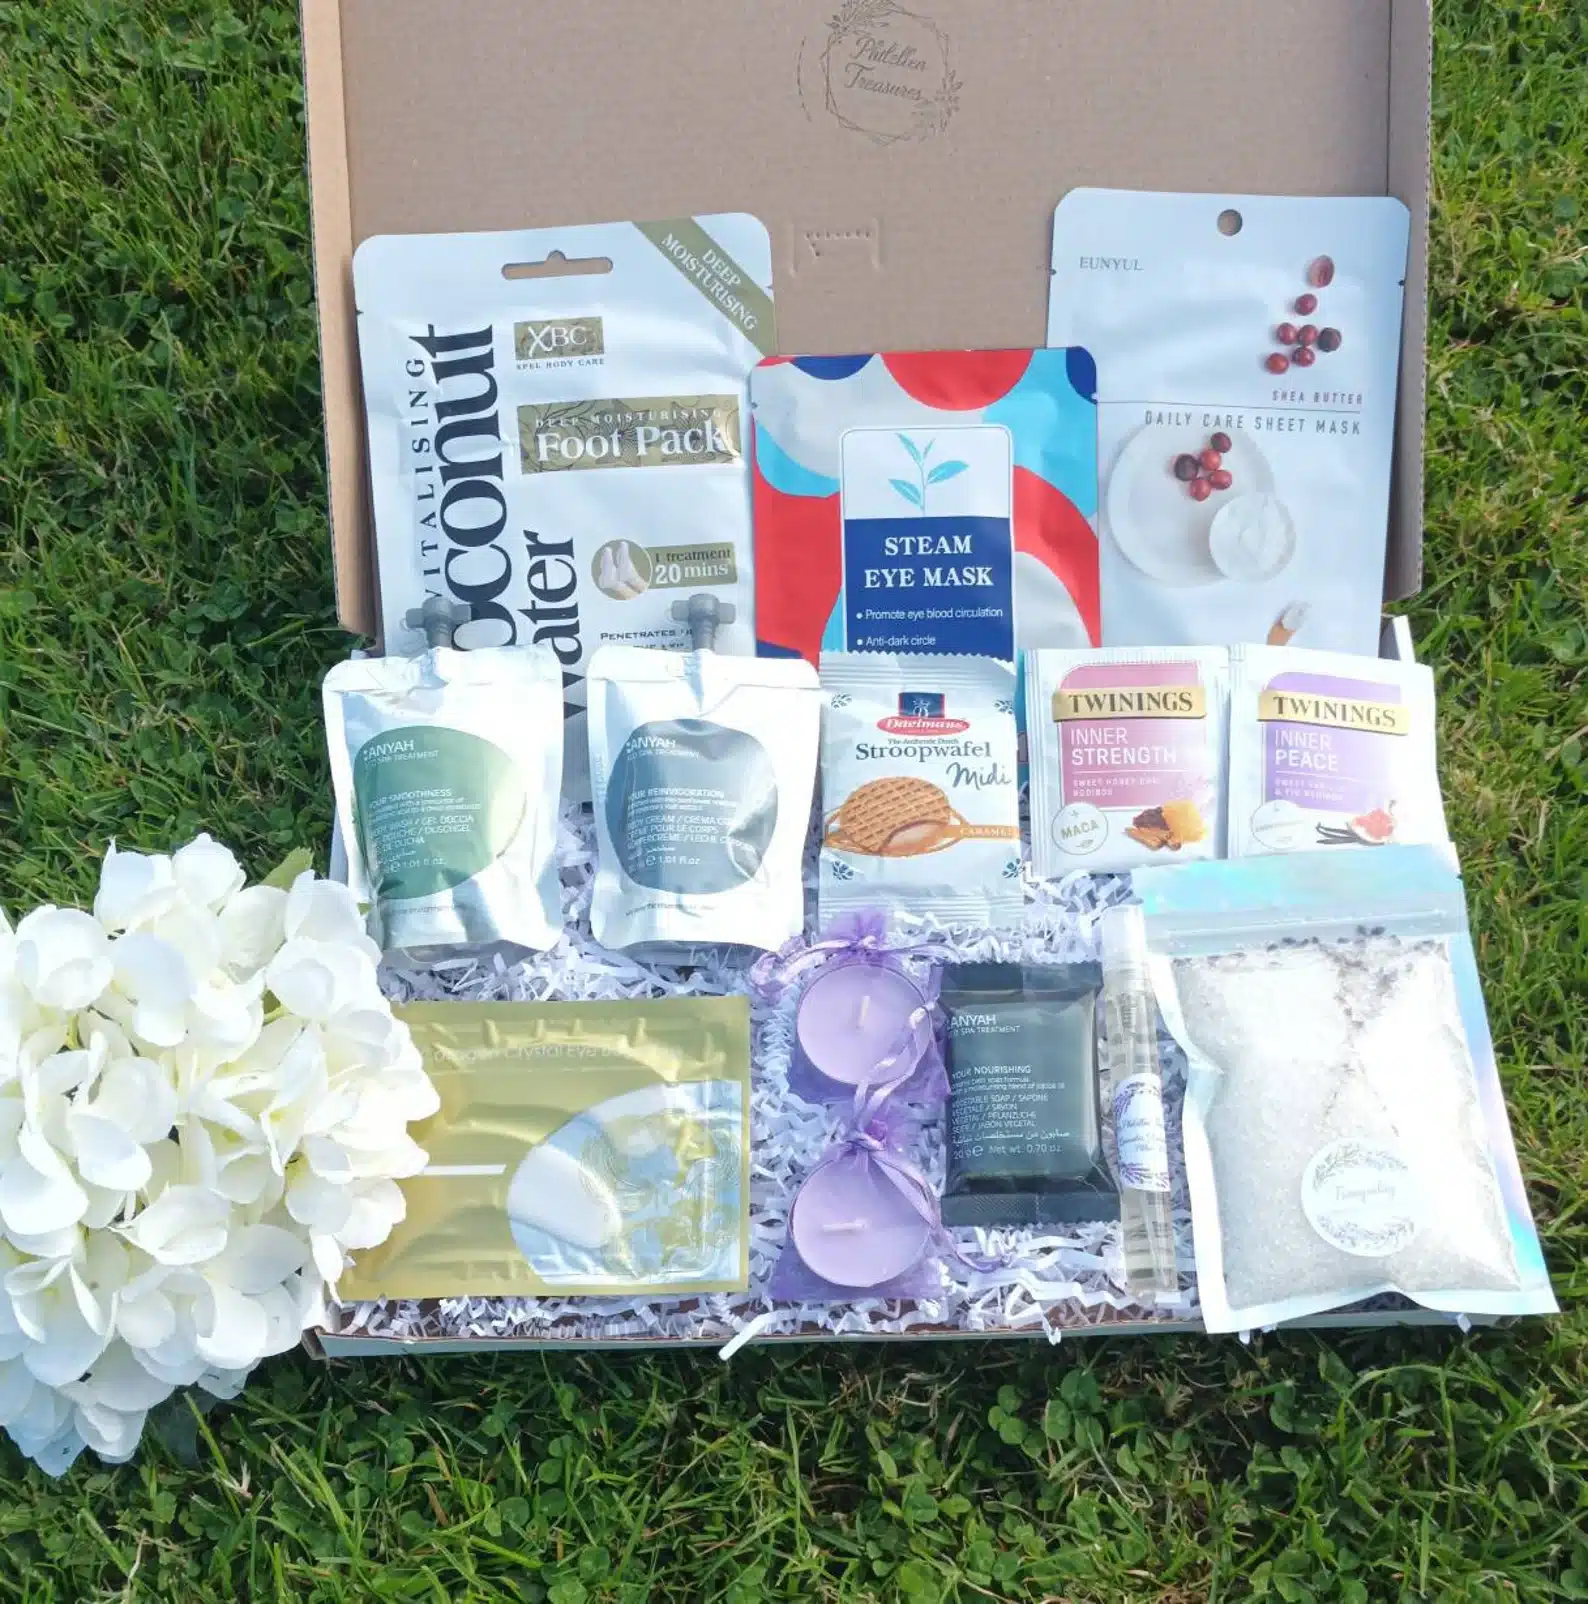 Bride to Be Gift Box